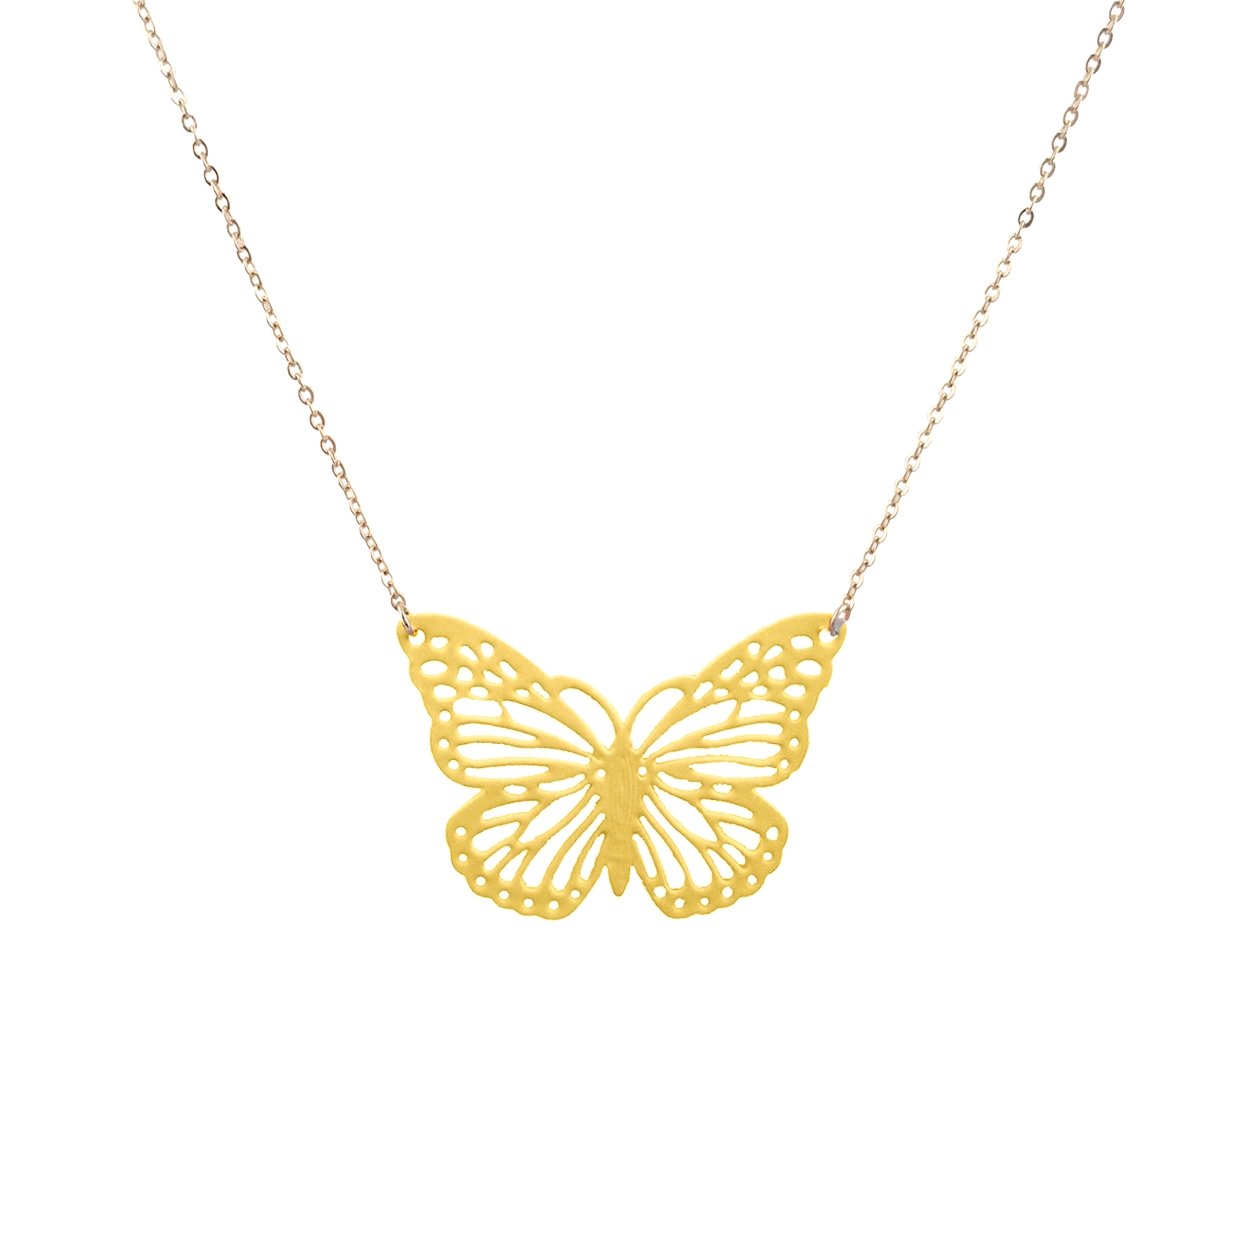 WANDA PLATA 925 Silver Butterfly Necklace with Butterfly Pendant for Women  Girls Jewellery in Gift Box, Sterling silver : Amazon.de: Fashion